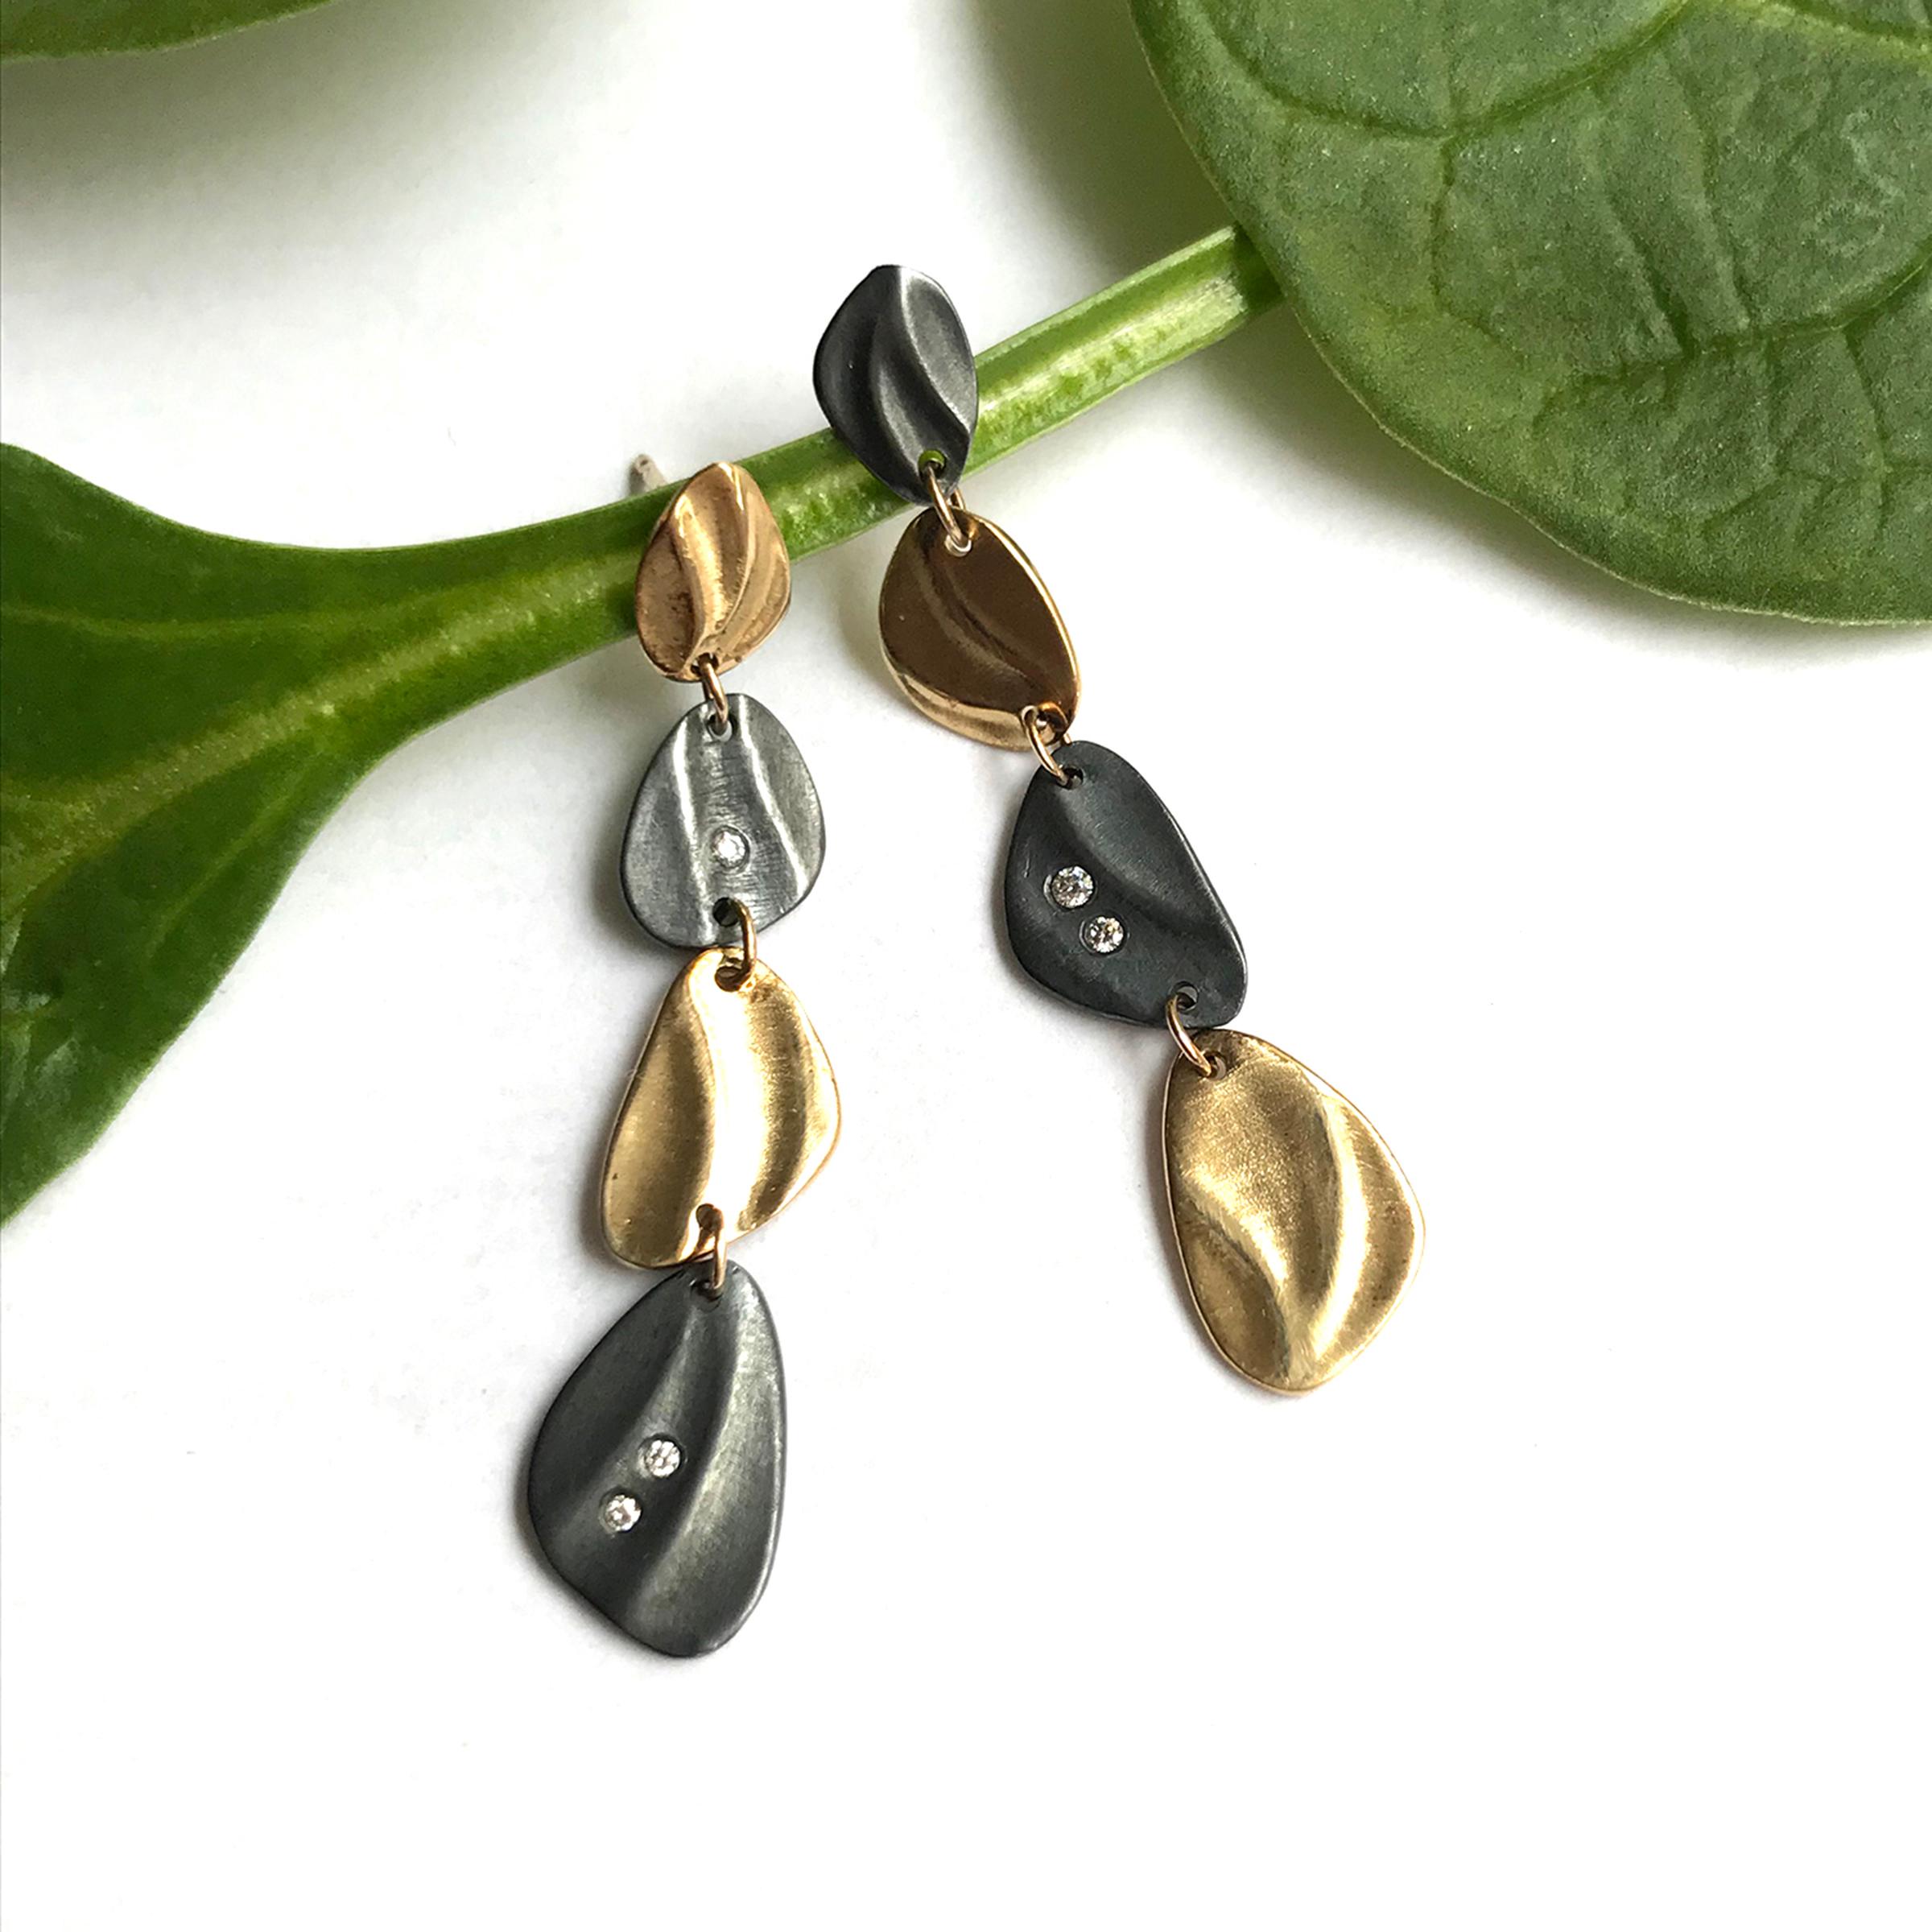 K.Mita's Pebble Dangle Earrings are handmade by the jewelry artist from 14 Karat Yellow Gold and Oxidized Sterling Silver with 0.05 Carat Diamond accents. These contemporary earrings feature the artist's signature Sand Dune texture and can be worn